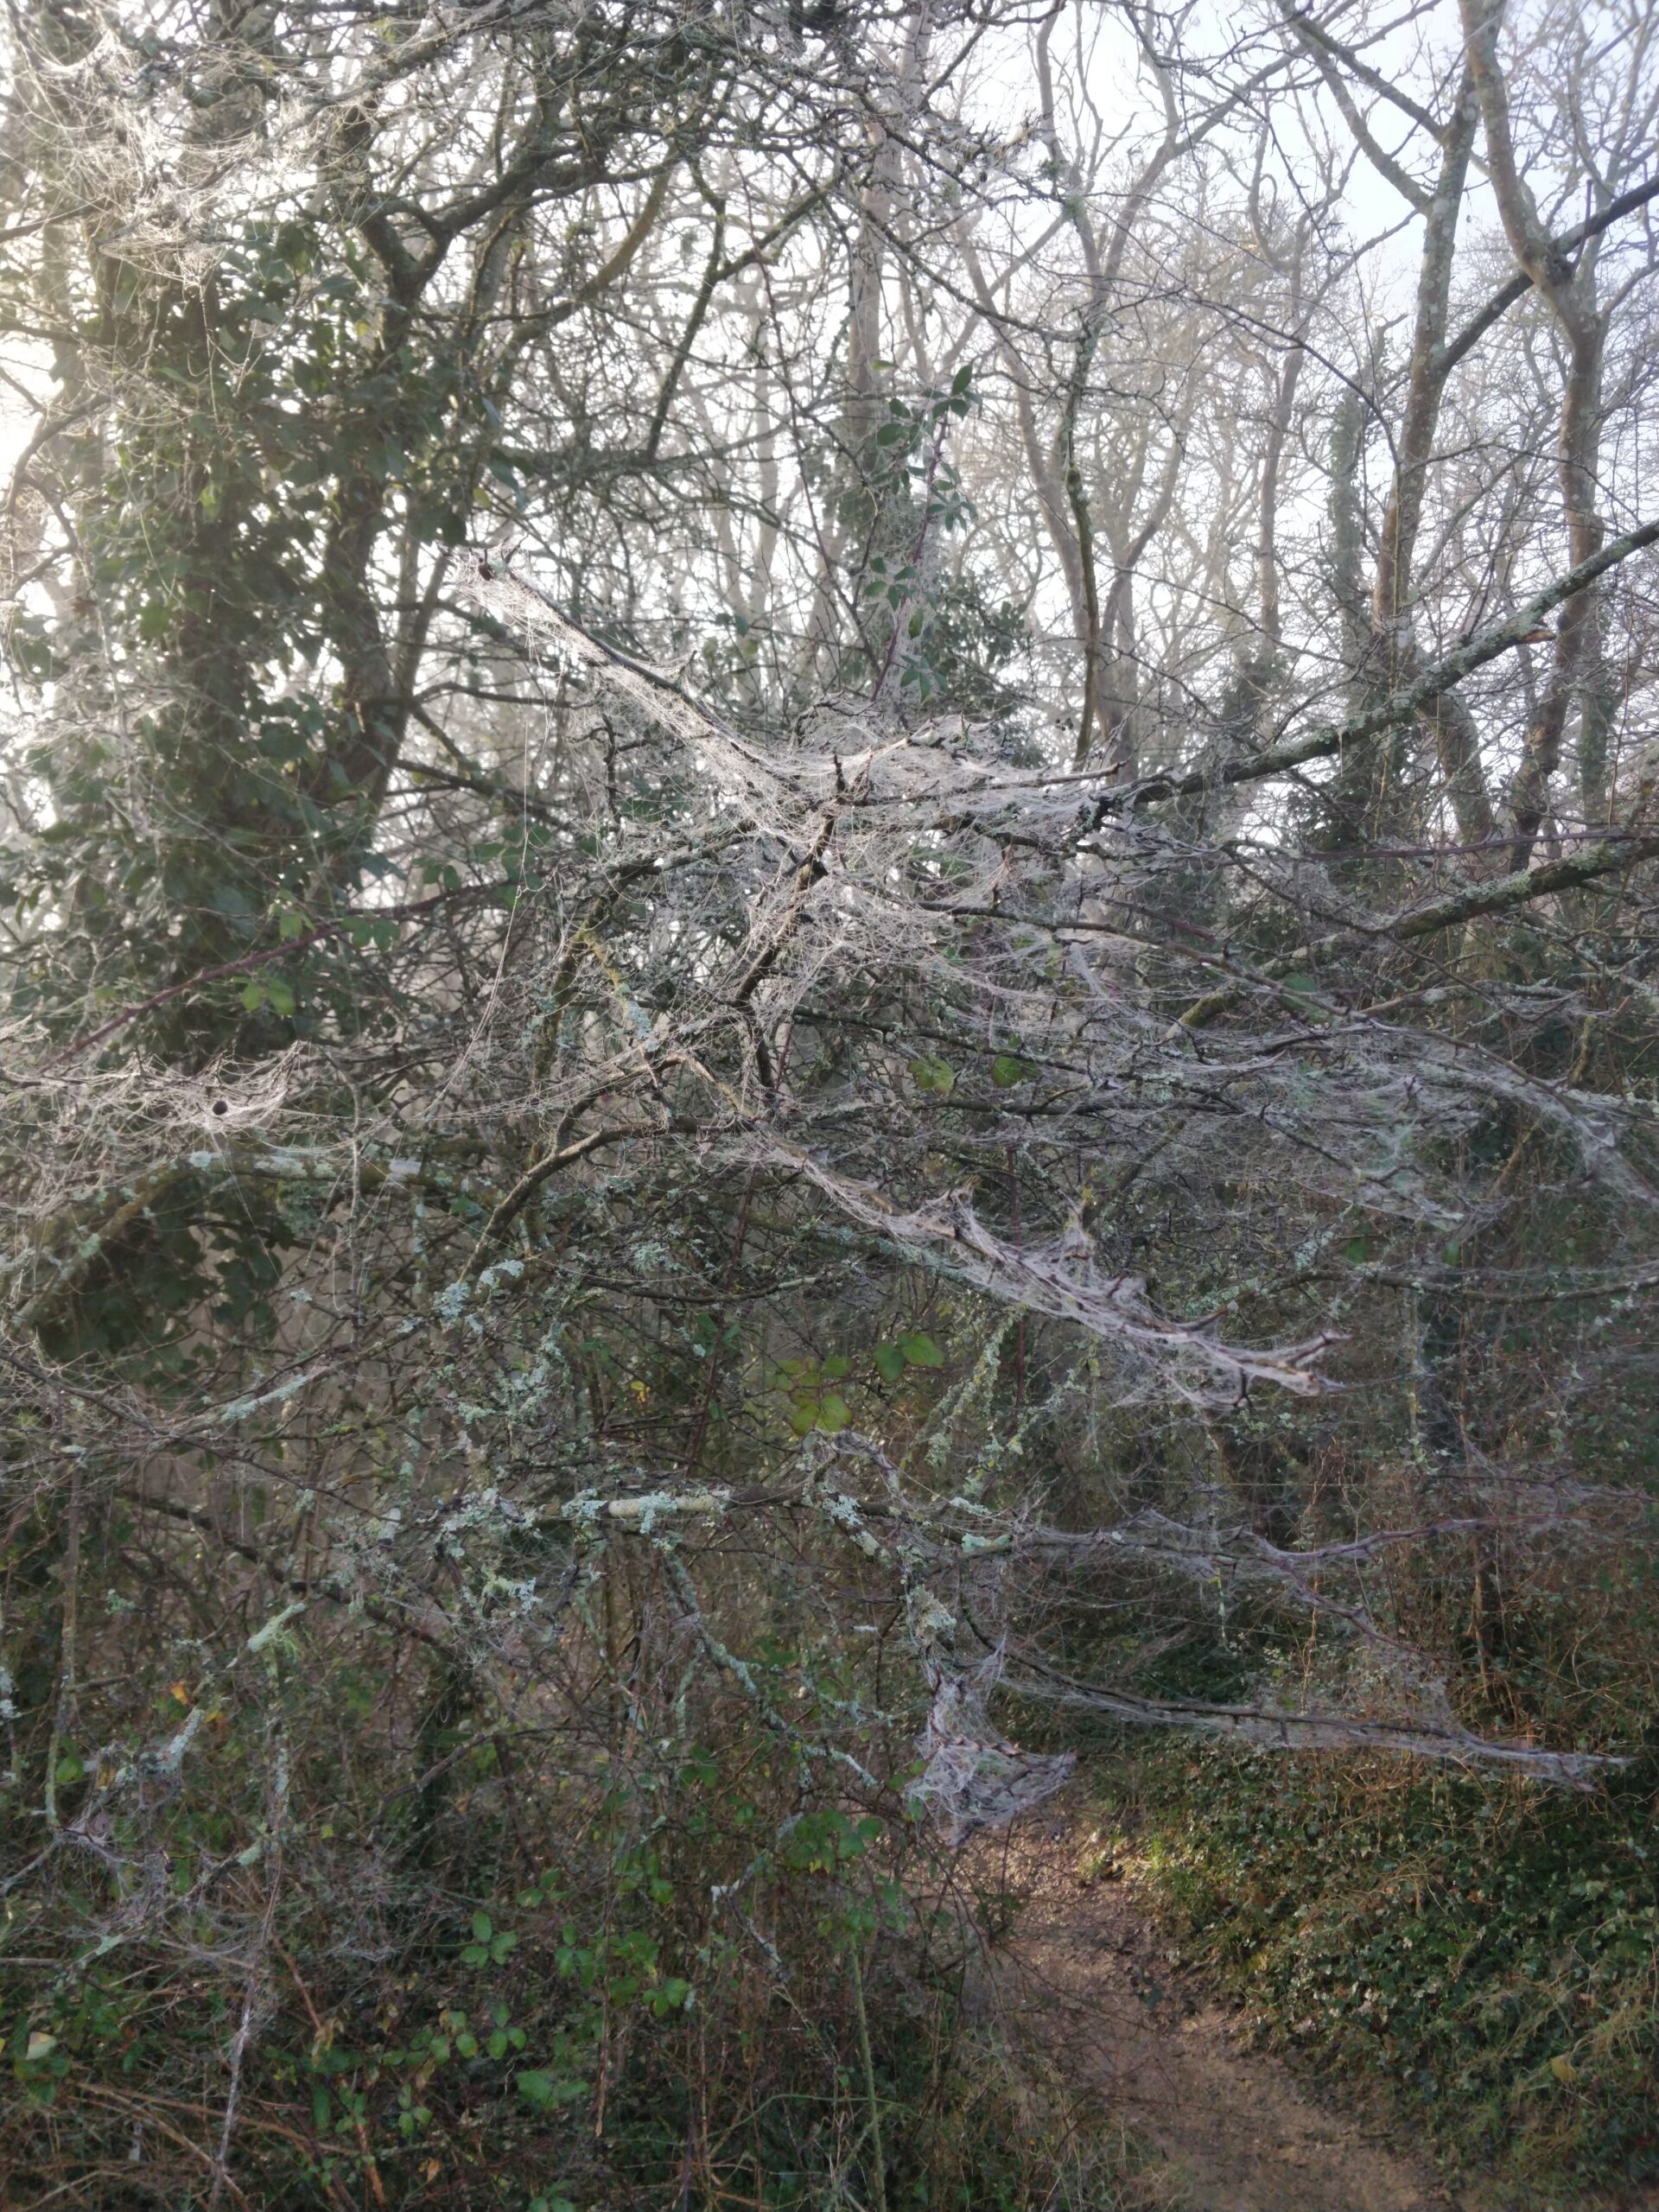 Droplets of mist outline a tangle of cobwebs on the branches of a tree on the edge of a winter wood.